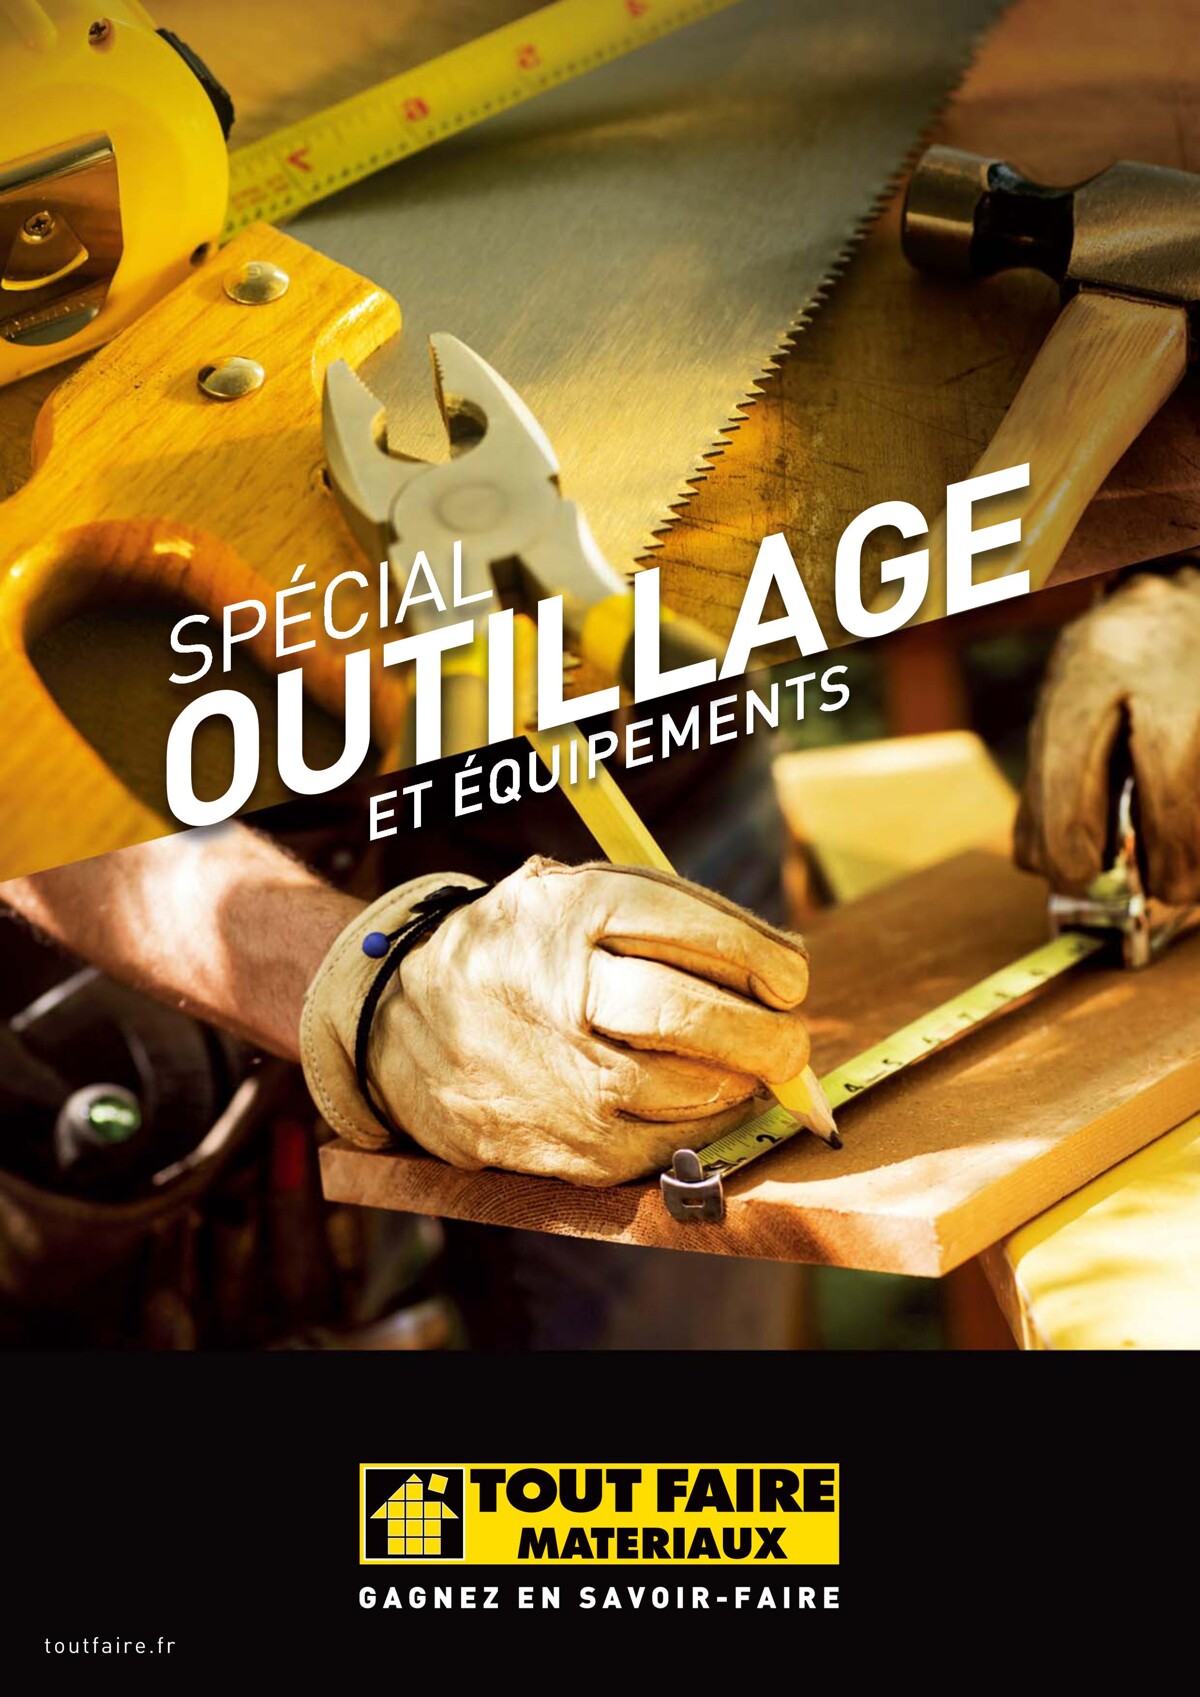 Catalogue Special Outillage et equipments, page 00001